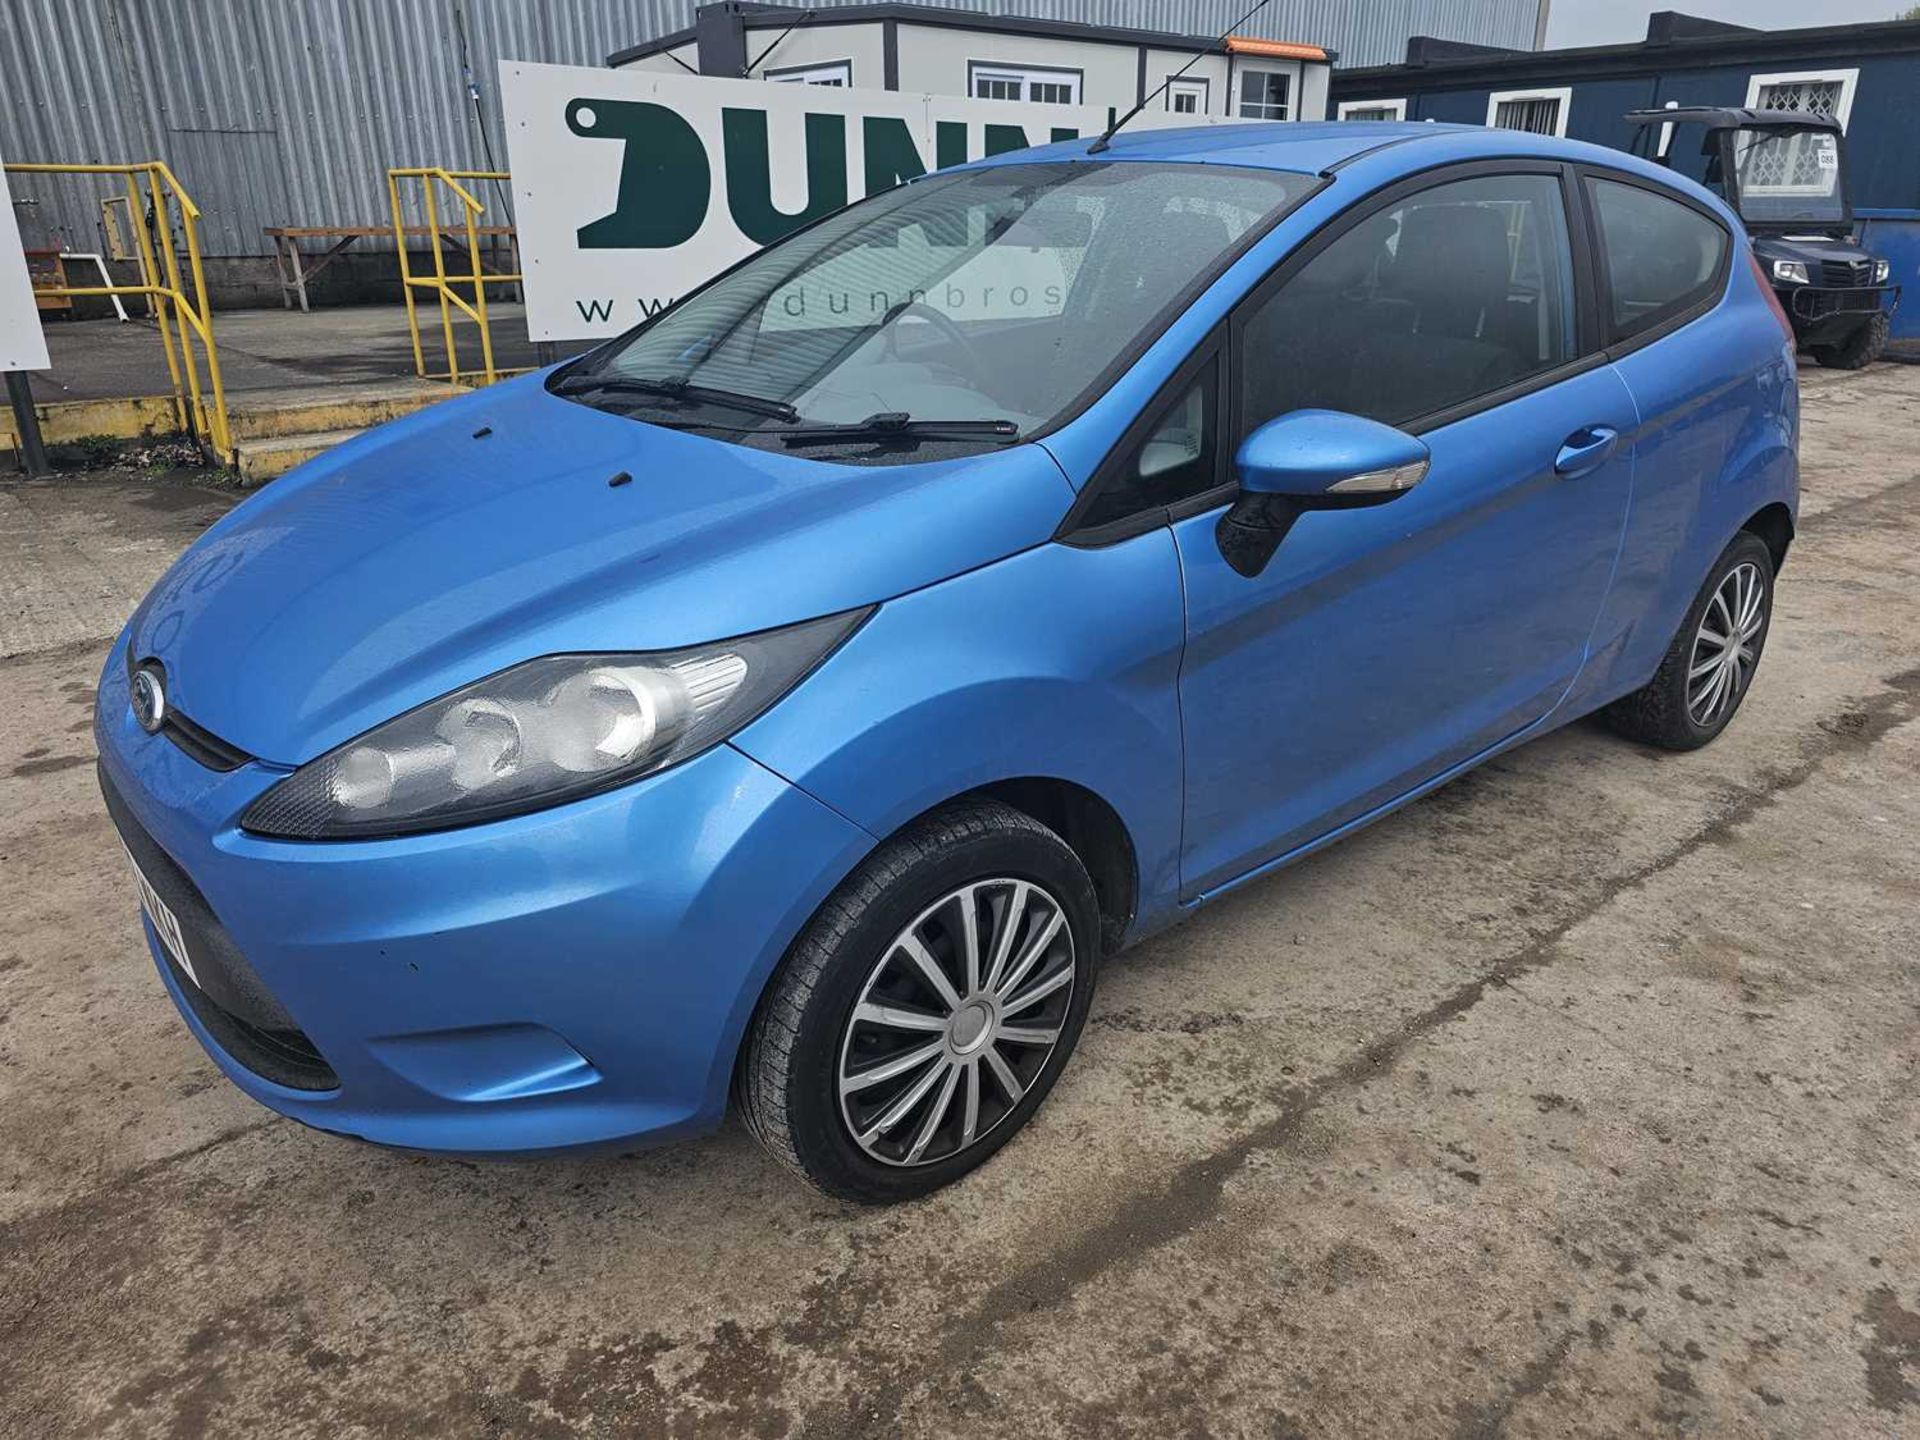 2009 Ford Fiesta Style 82, 5 Speed (Reg. Docs. Available)